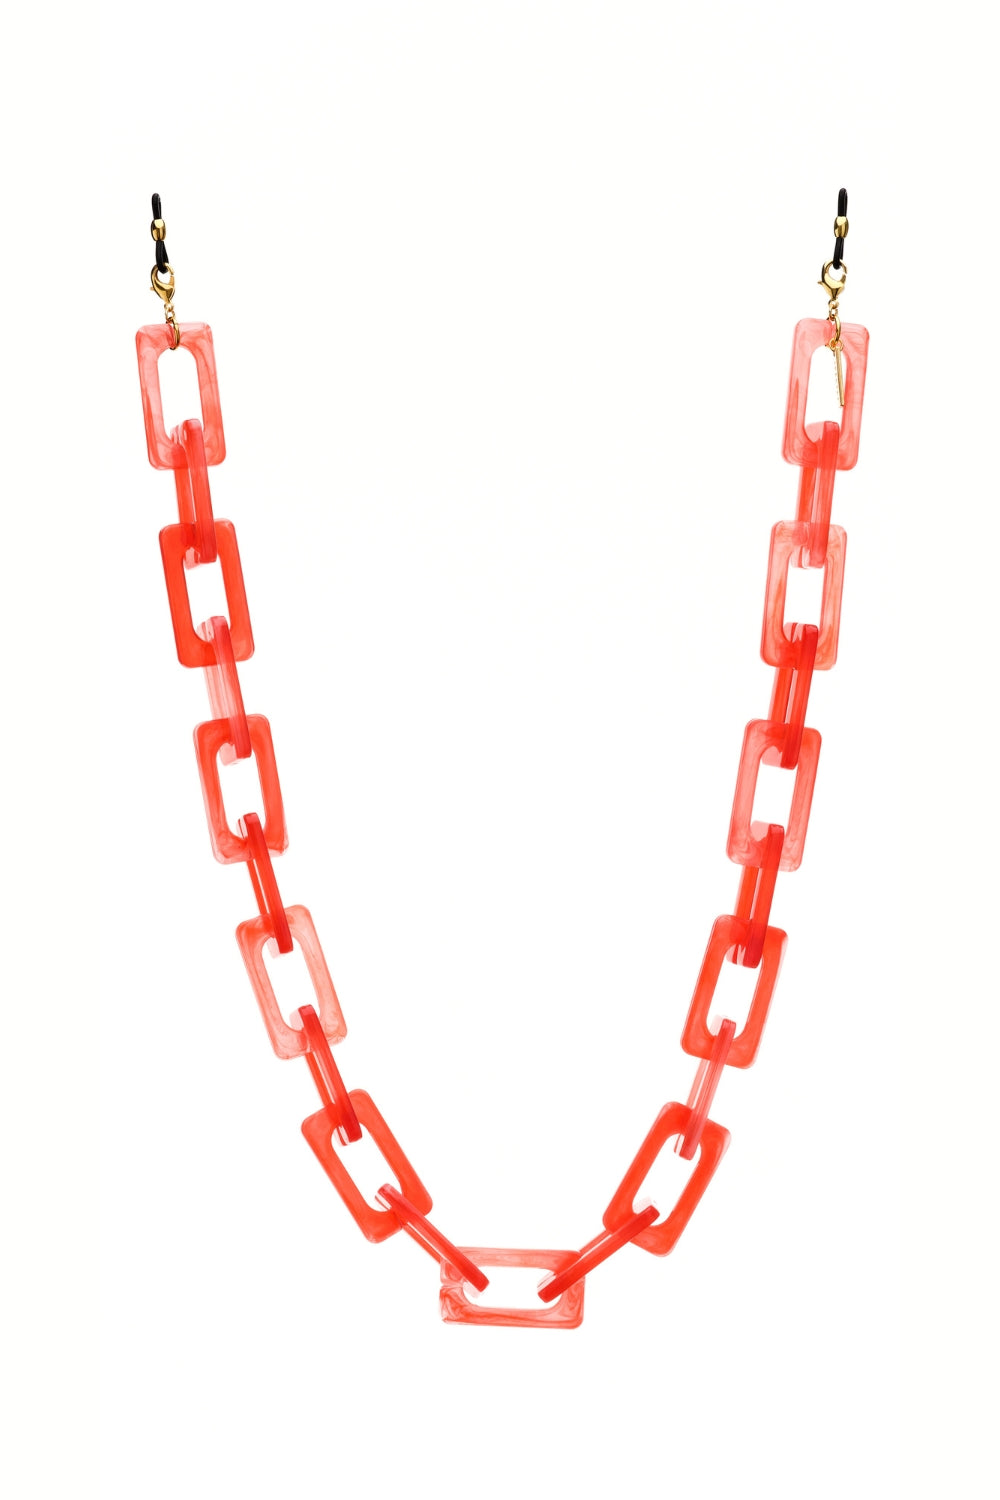 FAME FRAME - CORAL Chunky Eyewear Chain | SPECSET